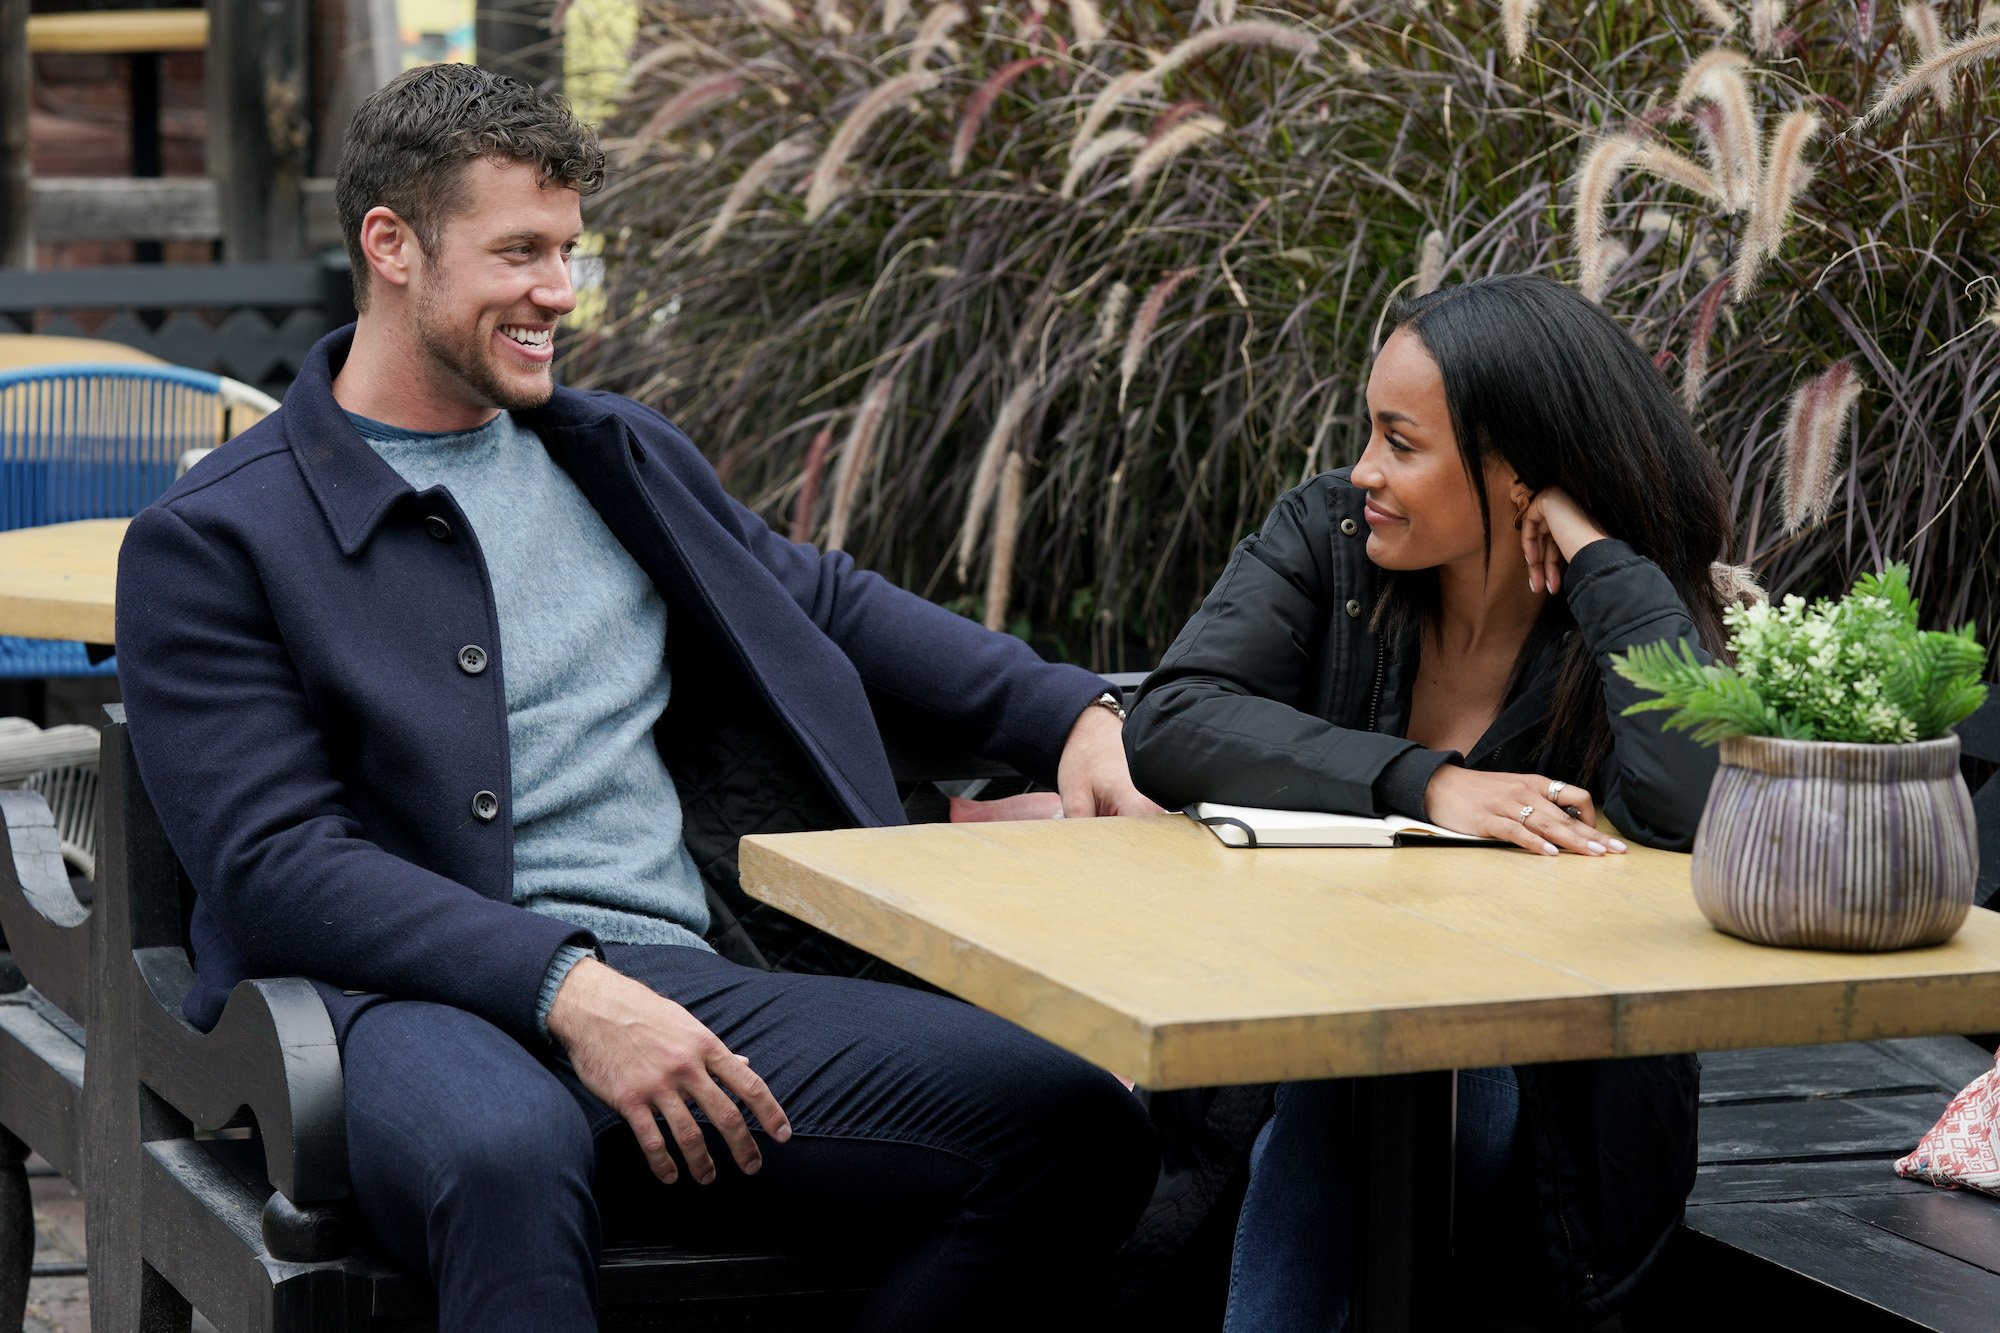 Clayton Echard and Serene Russell gaze at each other across a table. Is 'The Bachelor' on tonight, Feb. 28, 2022? Keep reading to find out.